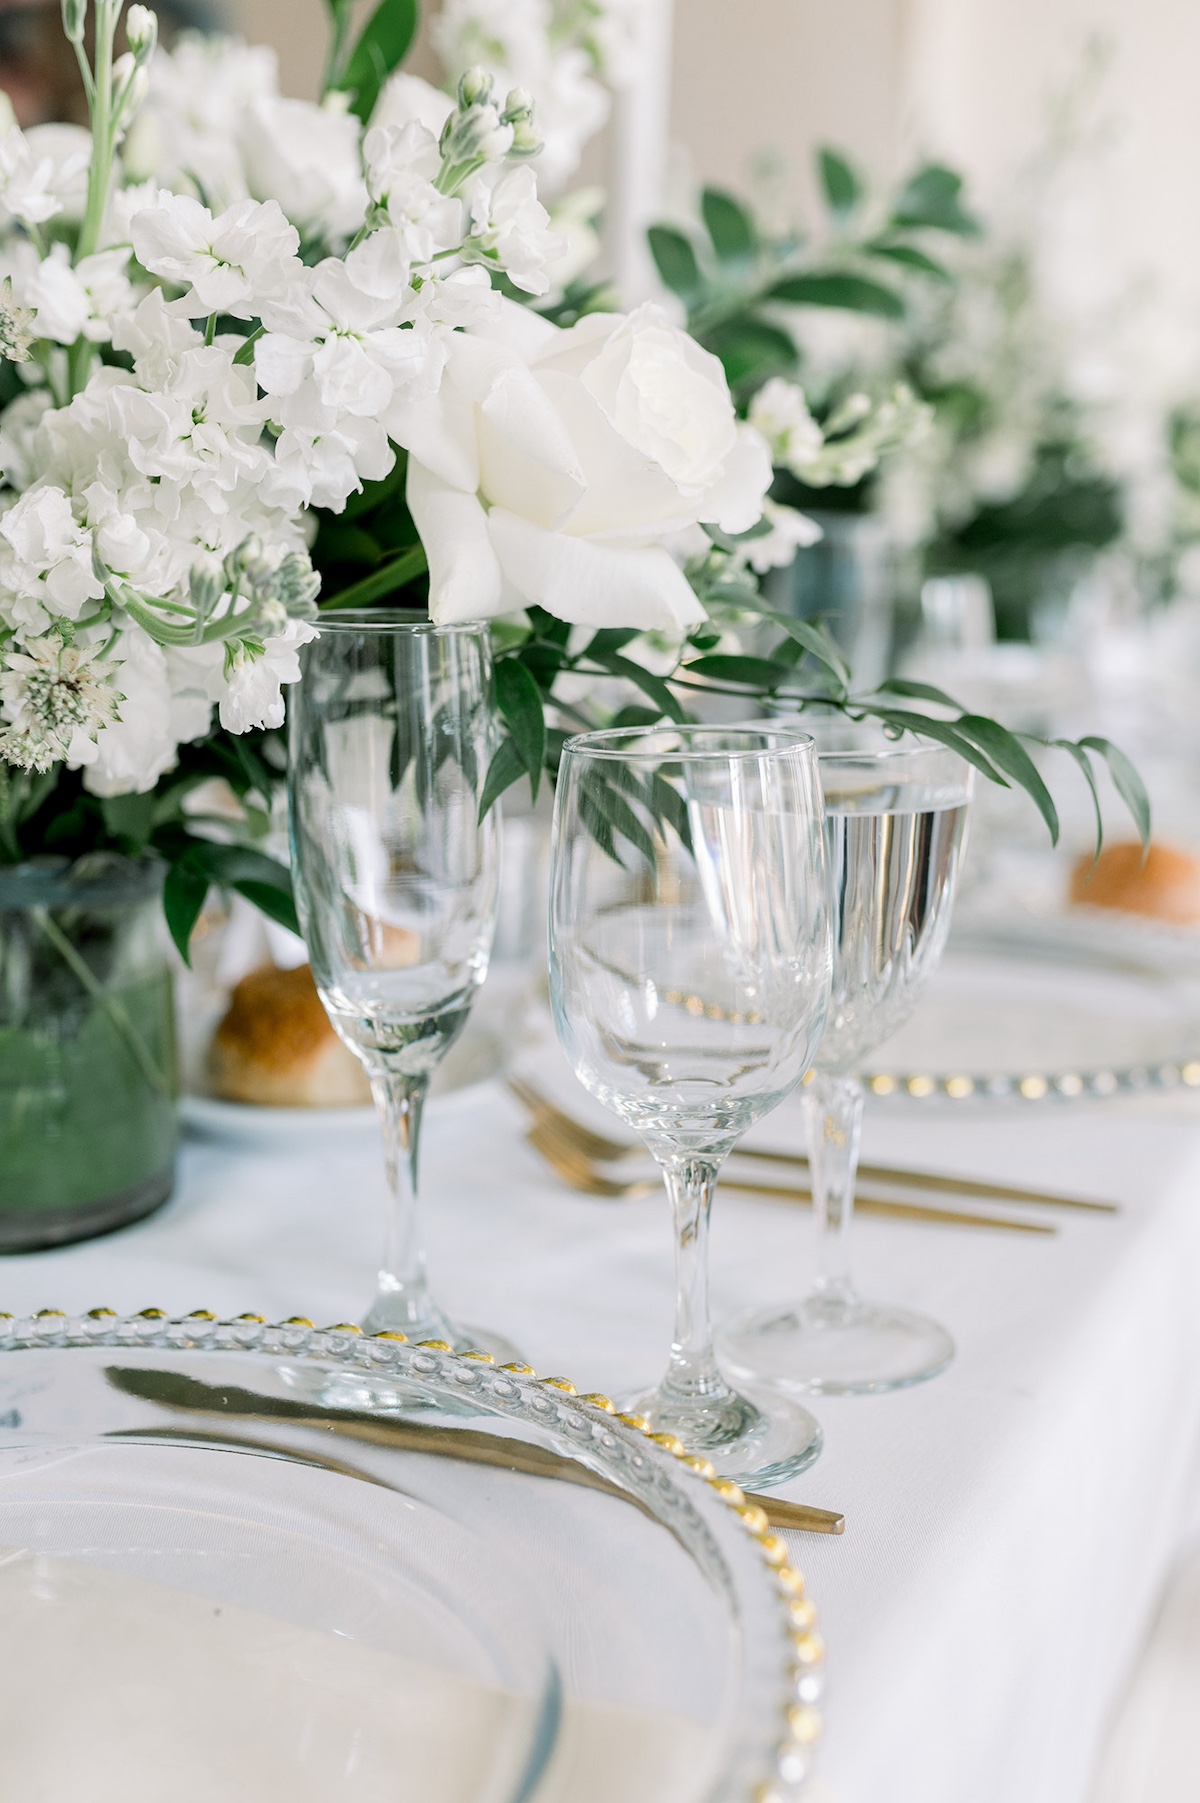 A chic composition highlighting the details of place settings, meticulously arranged to elevate the sophistication of the event.